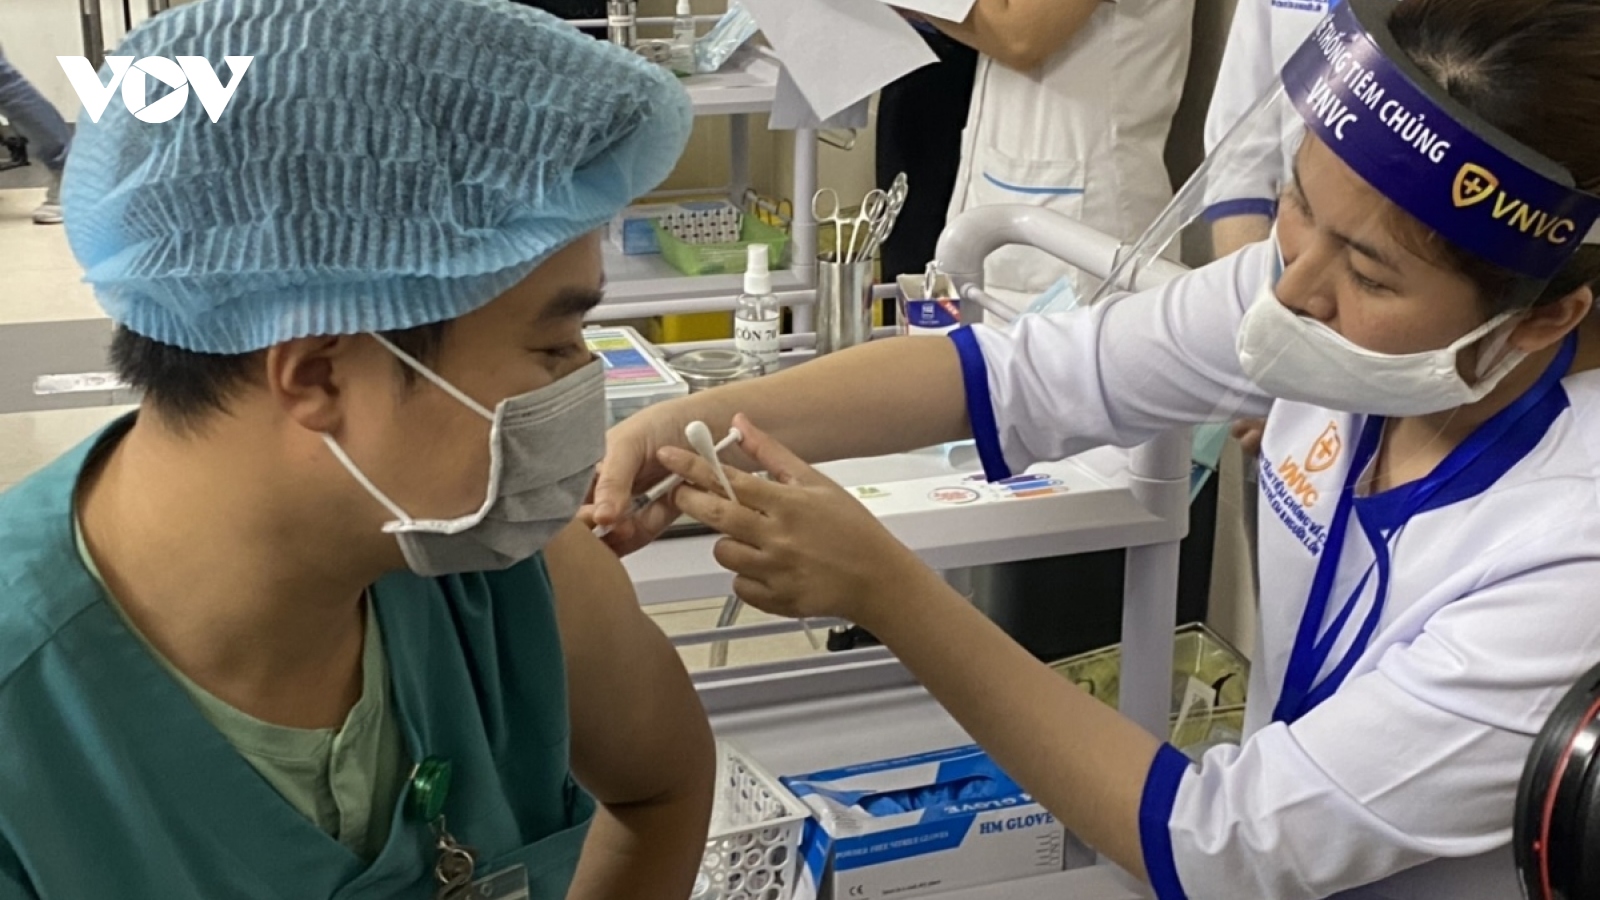 First AstraZeneca vaccine side-effects reported in Vietnam